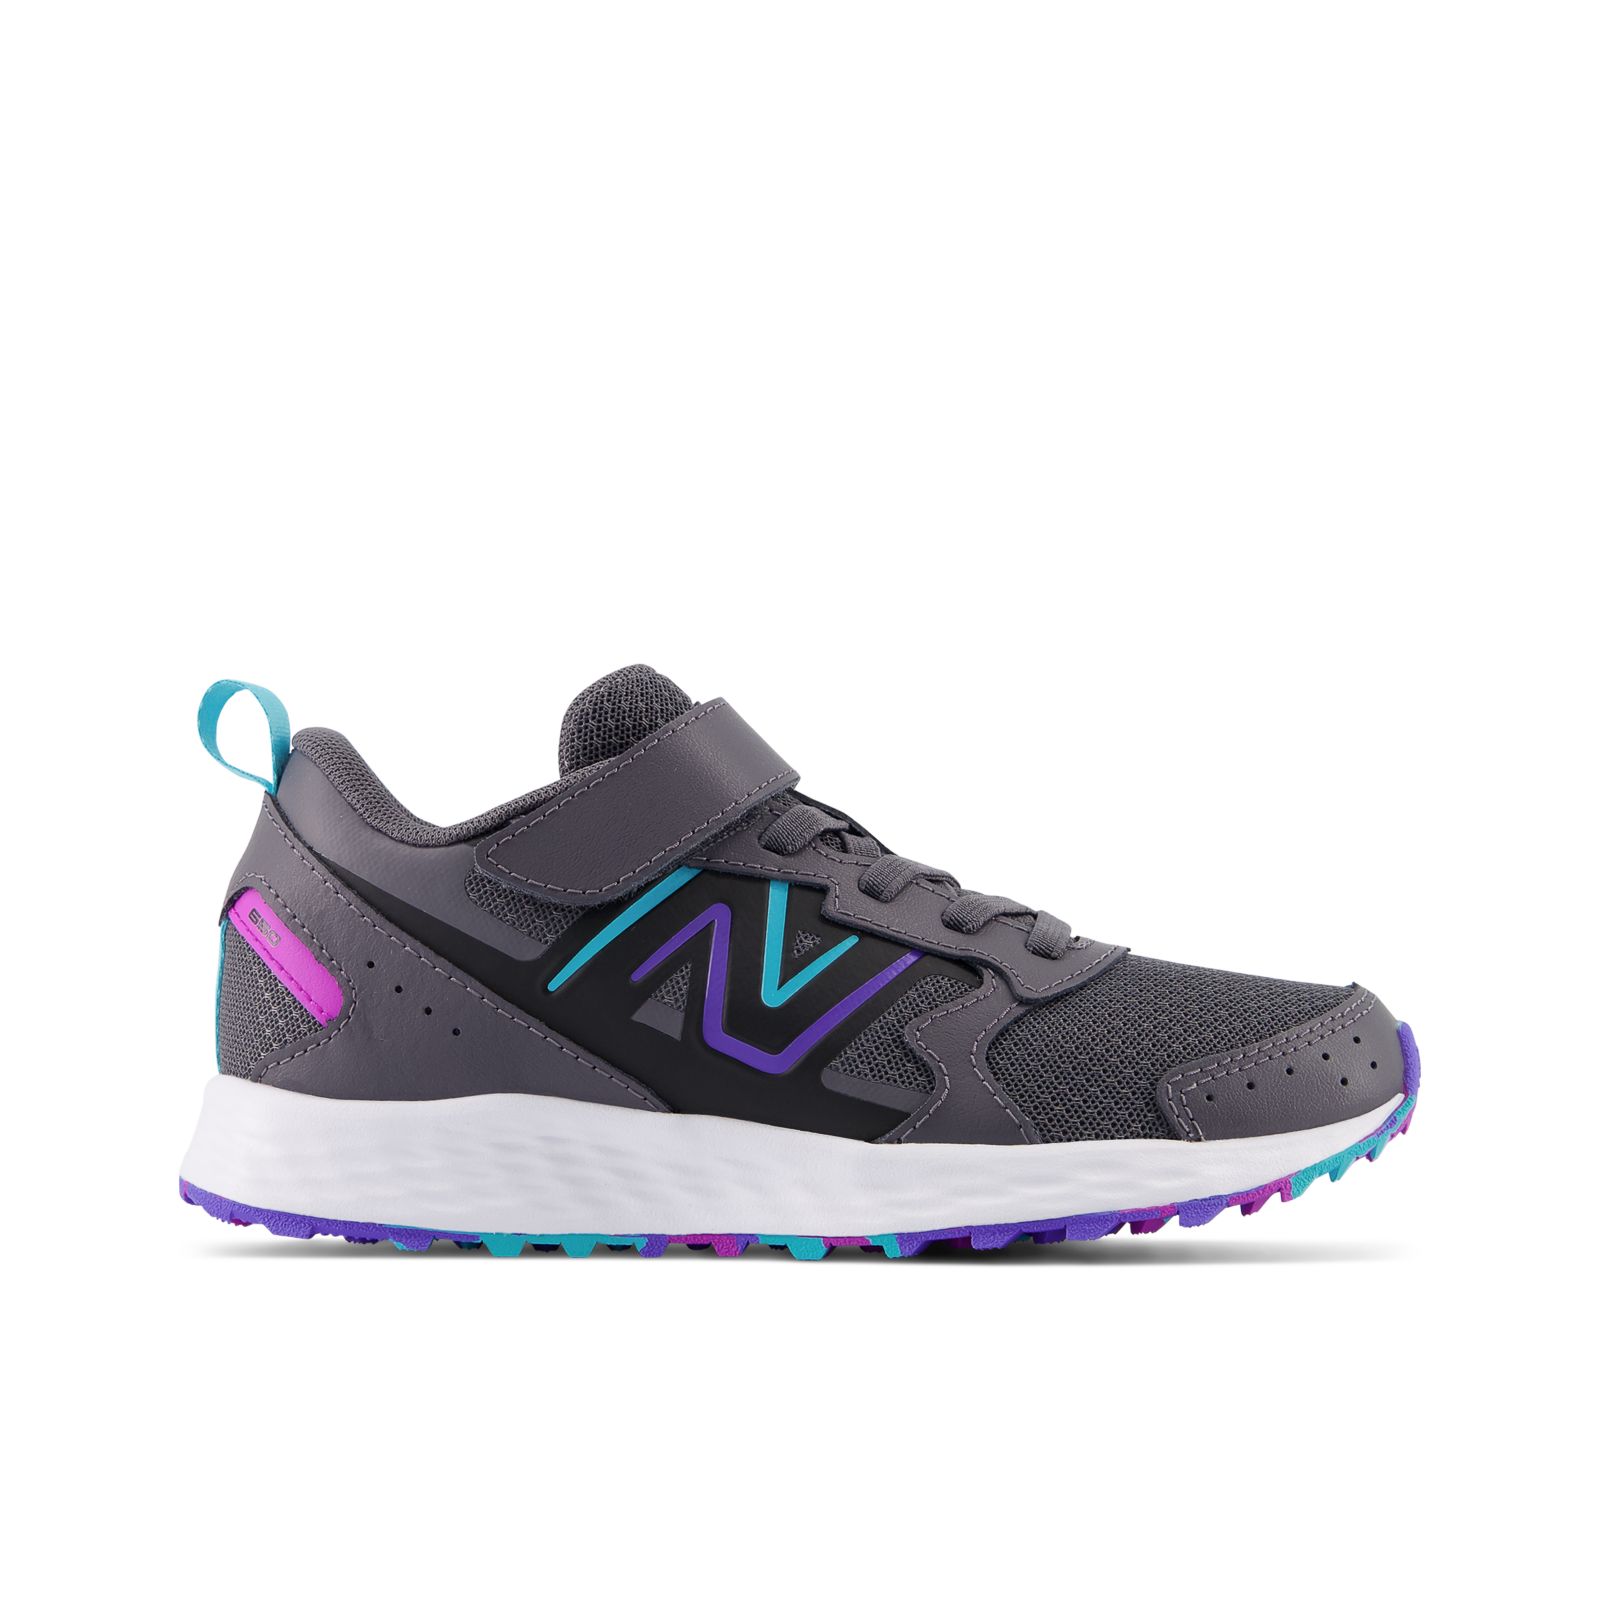 Propio vegetariano Misterioso Fresh Foam 650 Bungee Lace with Top Strap - New Balance